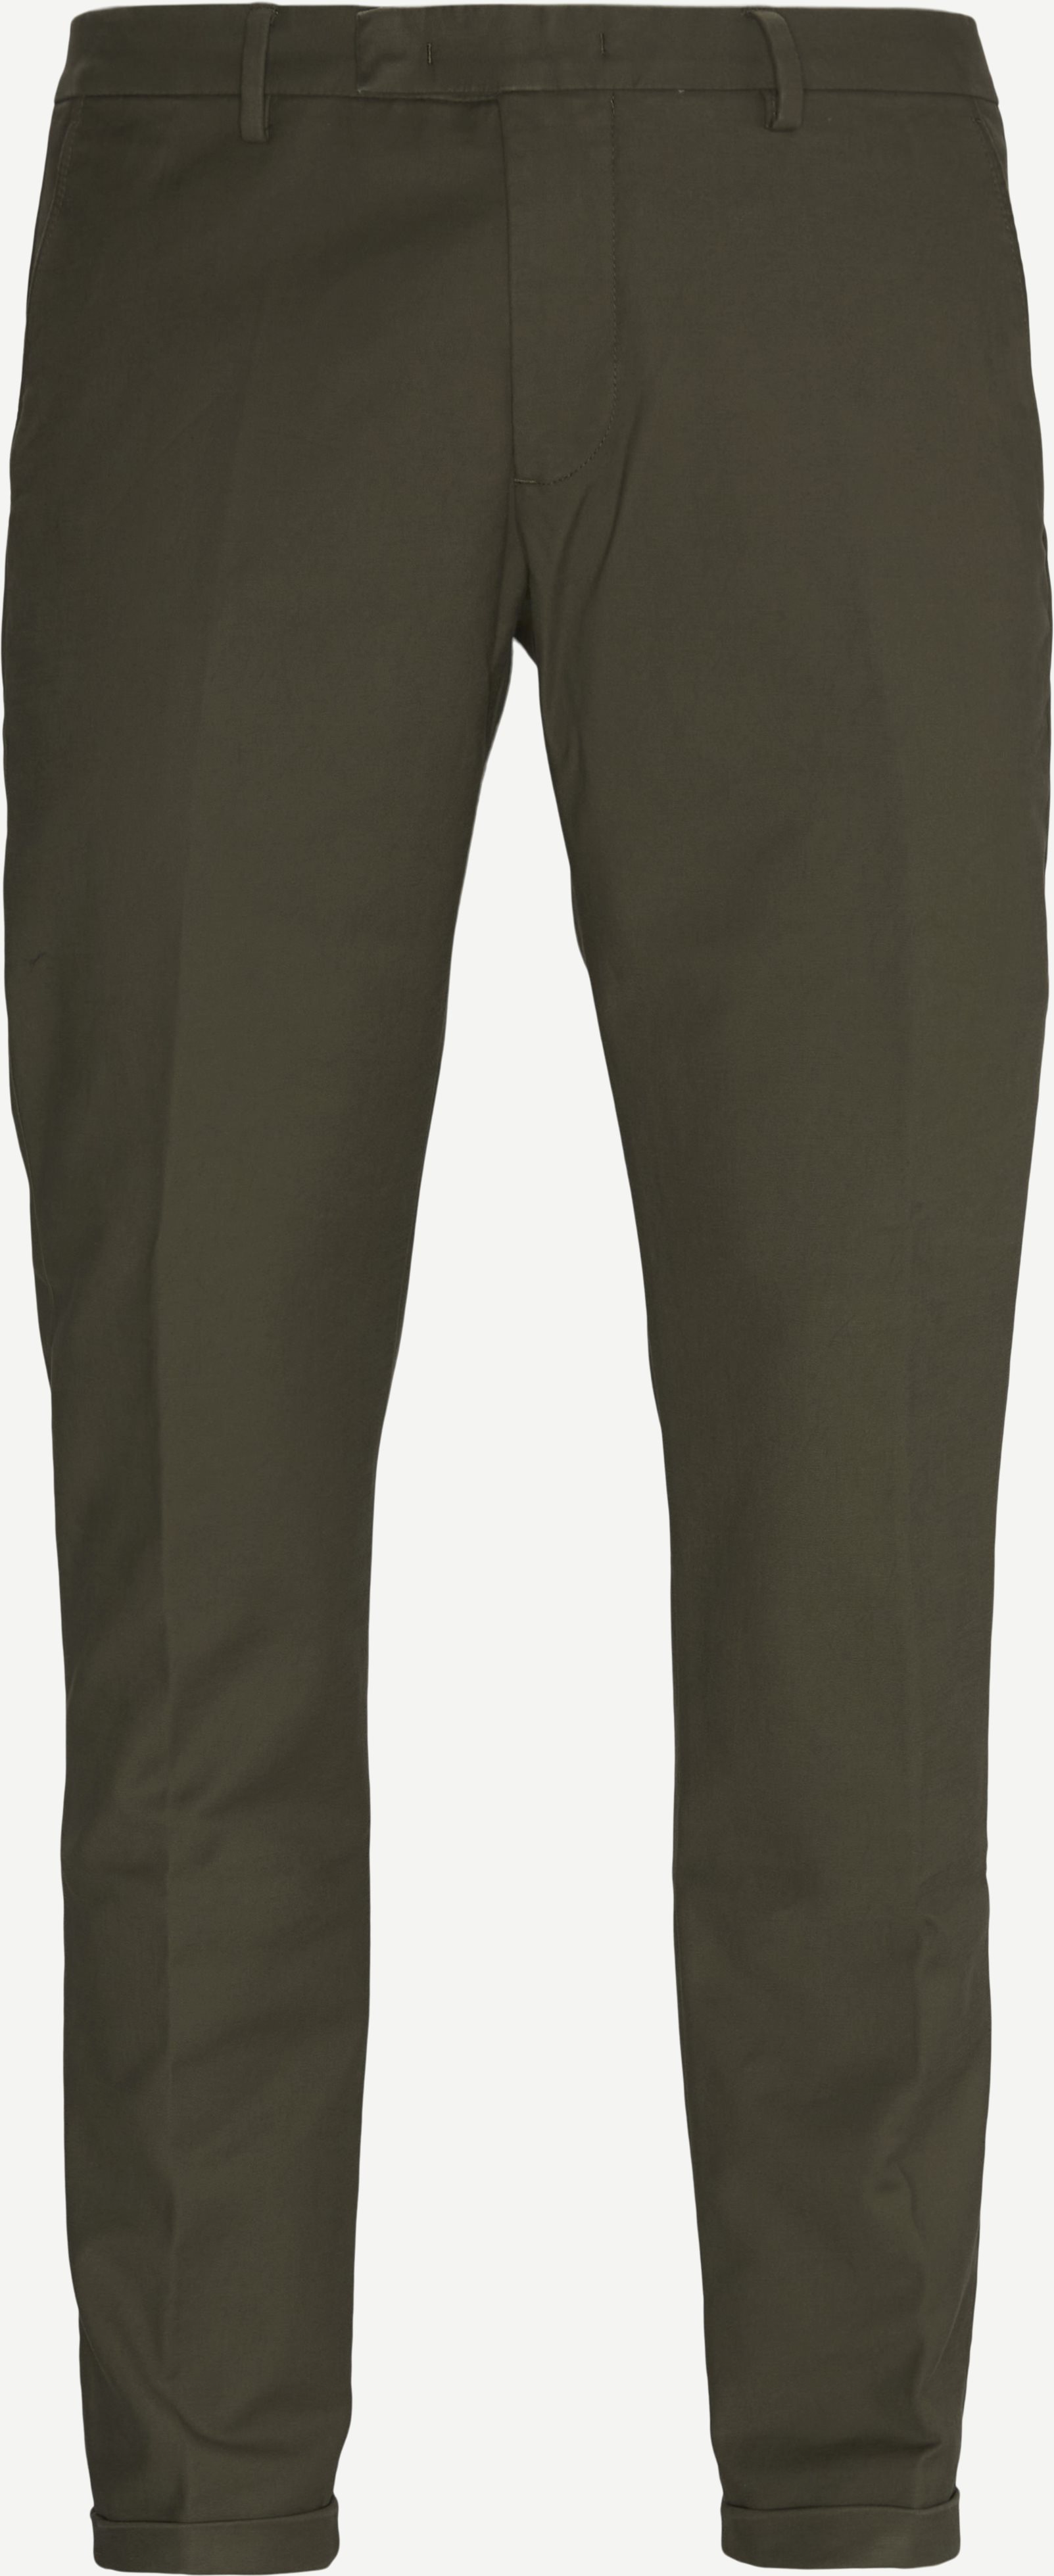 Scott Chinos - Trousers - Regular fit - Army